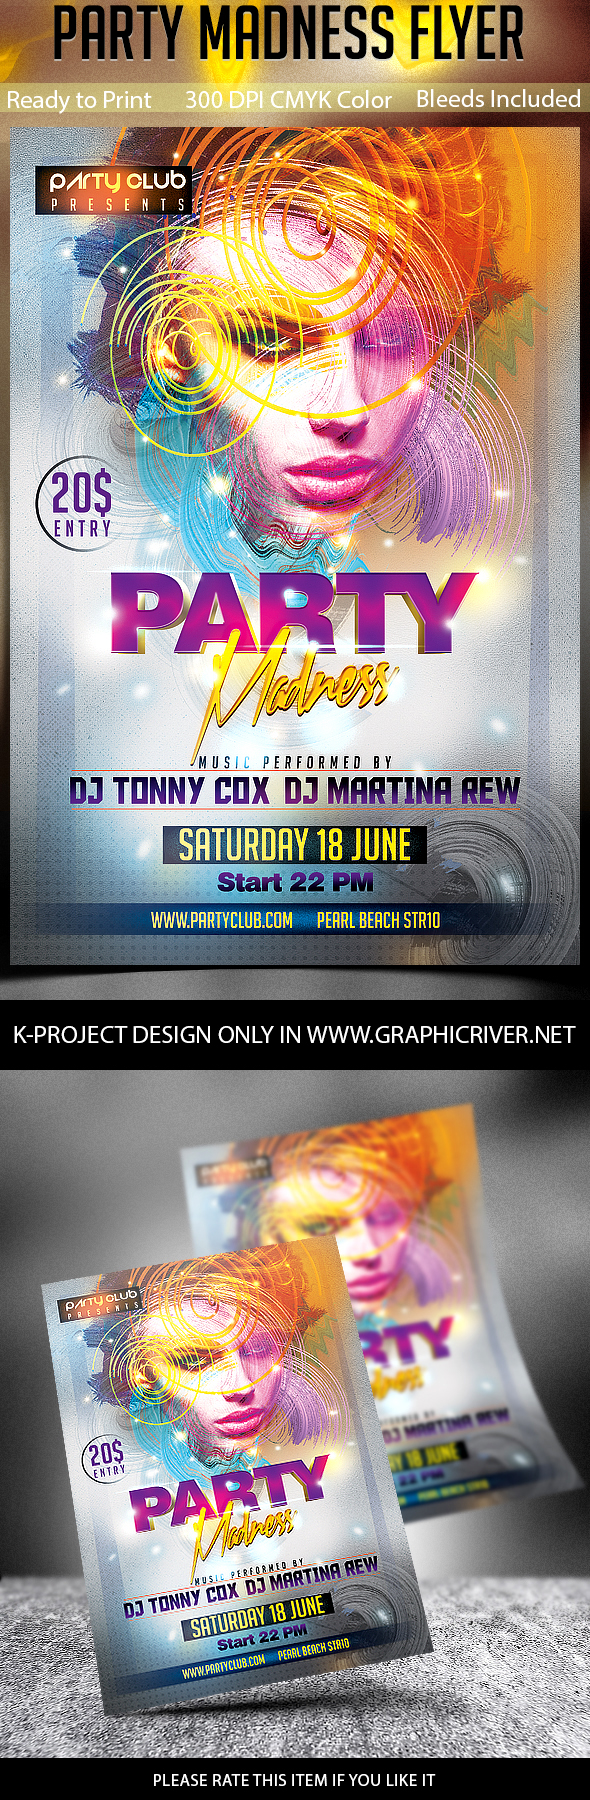 party madness flyer Event print design club